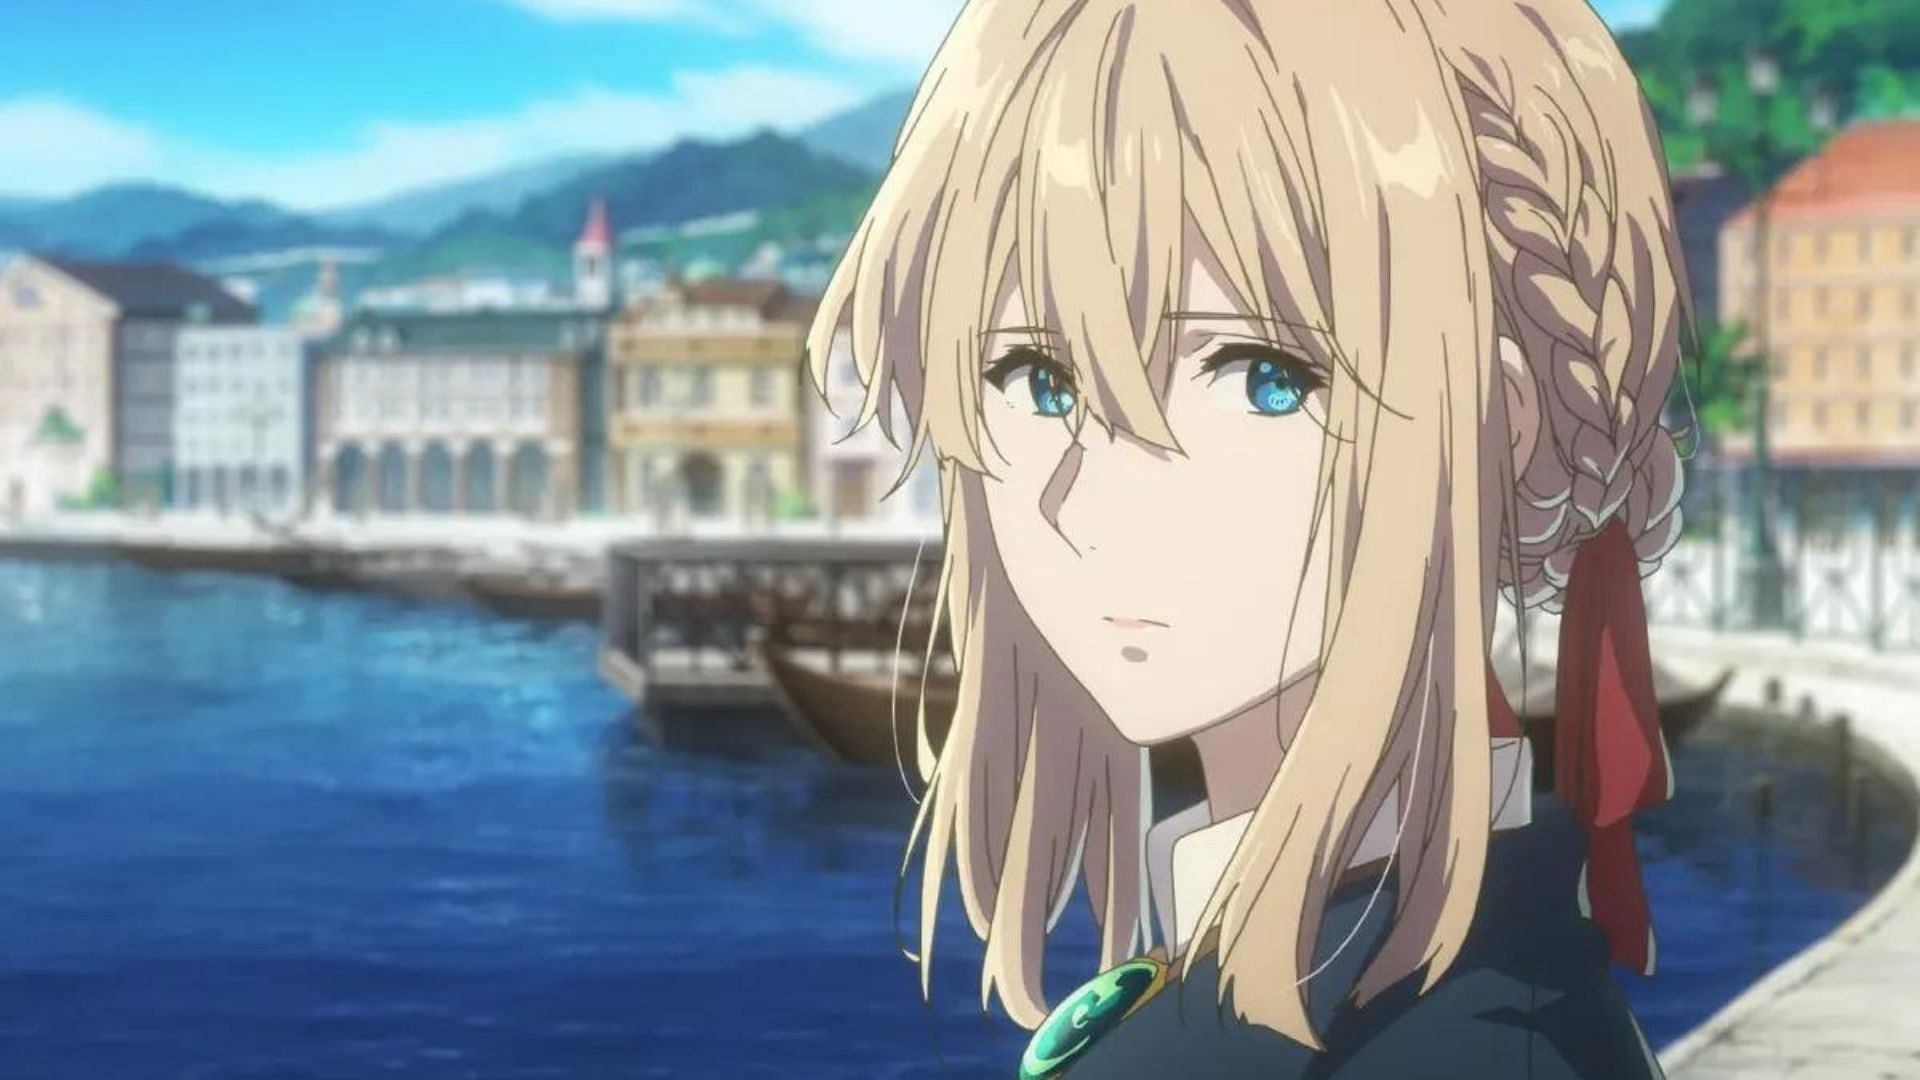 Violet Evergarden as seen in the anime (Image via Kyoto Animation)